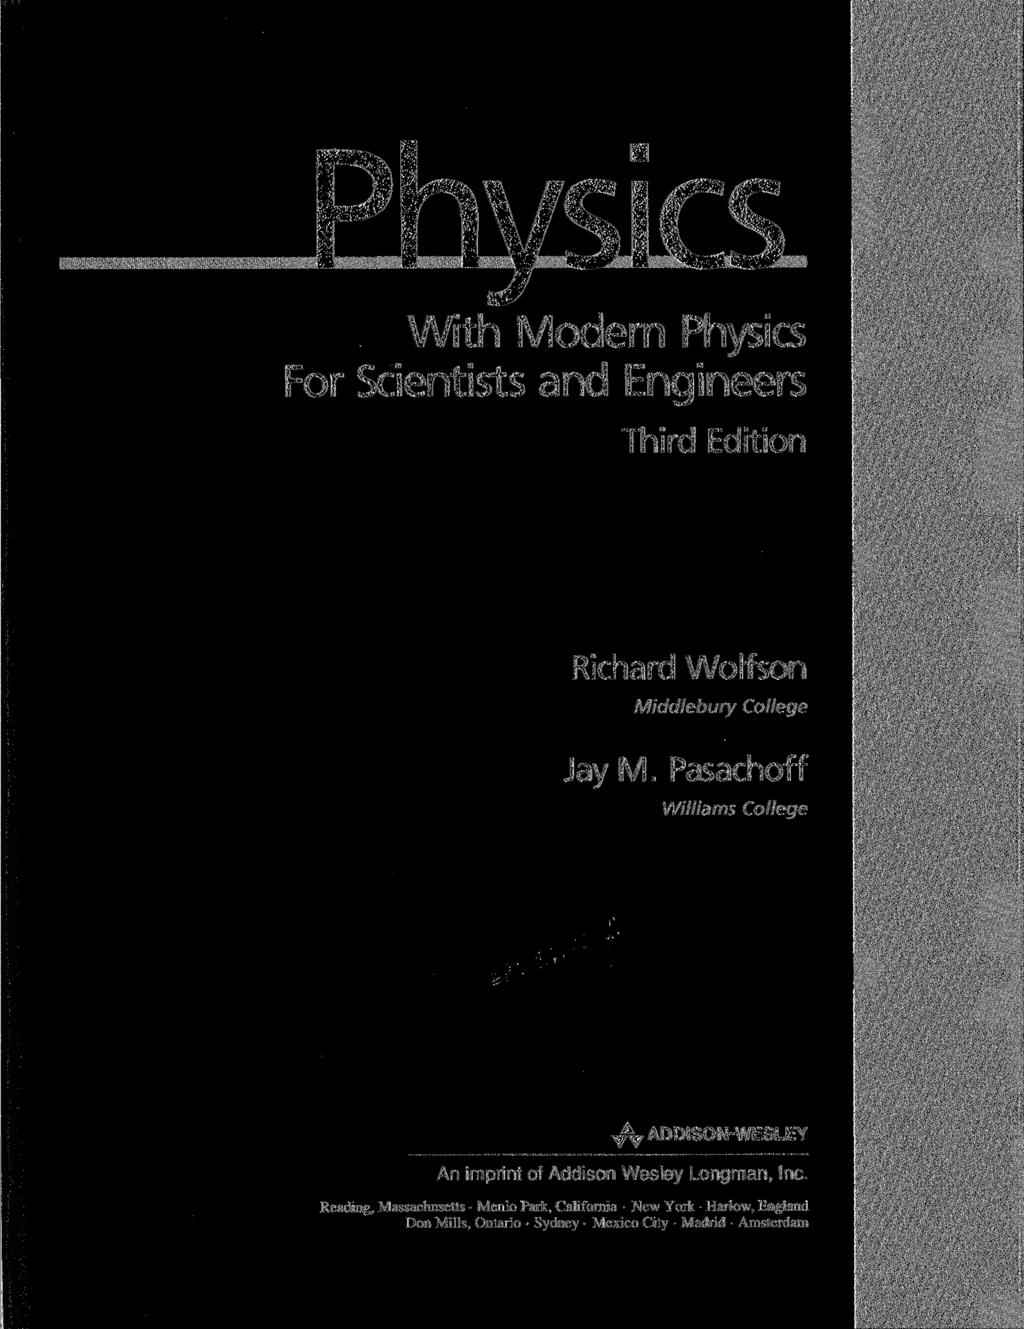 With Modern Physics For Scientists and Engineers Third Edition Richard Wolfson Middlebury College Jay M.